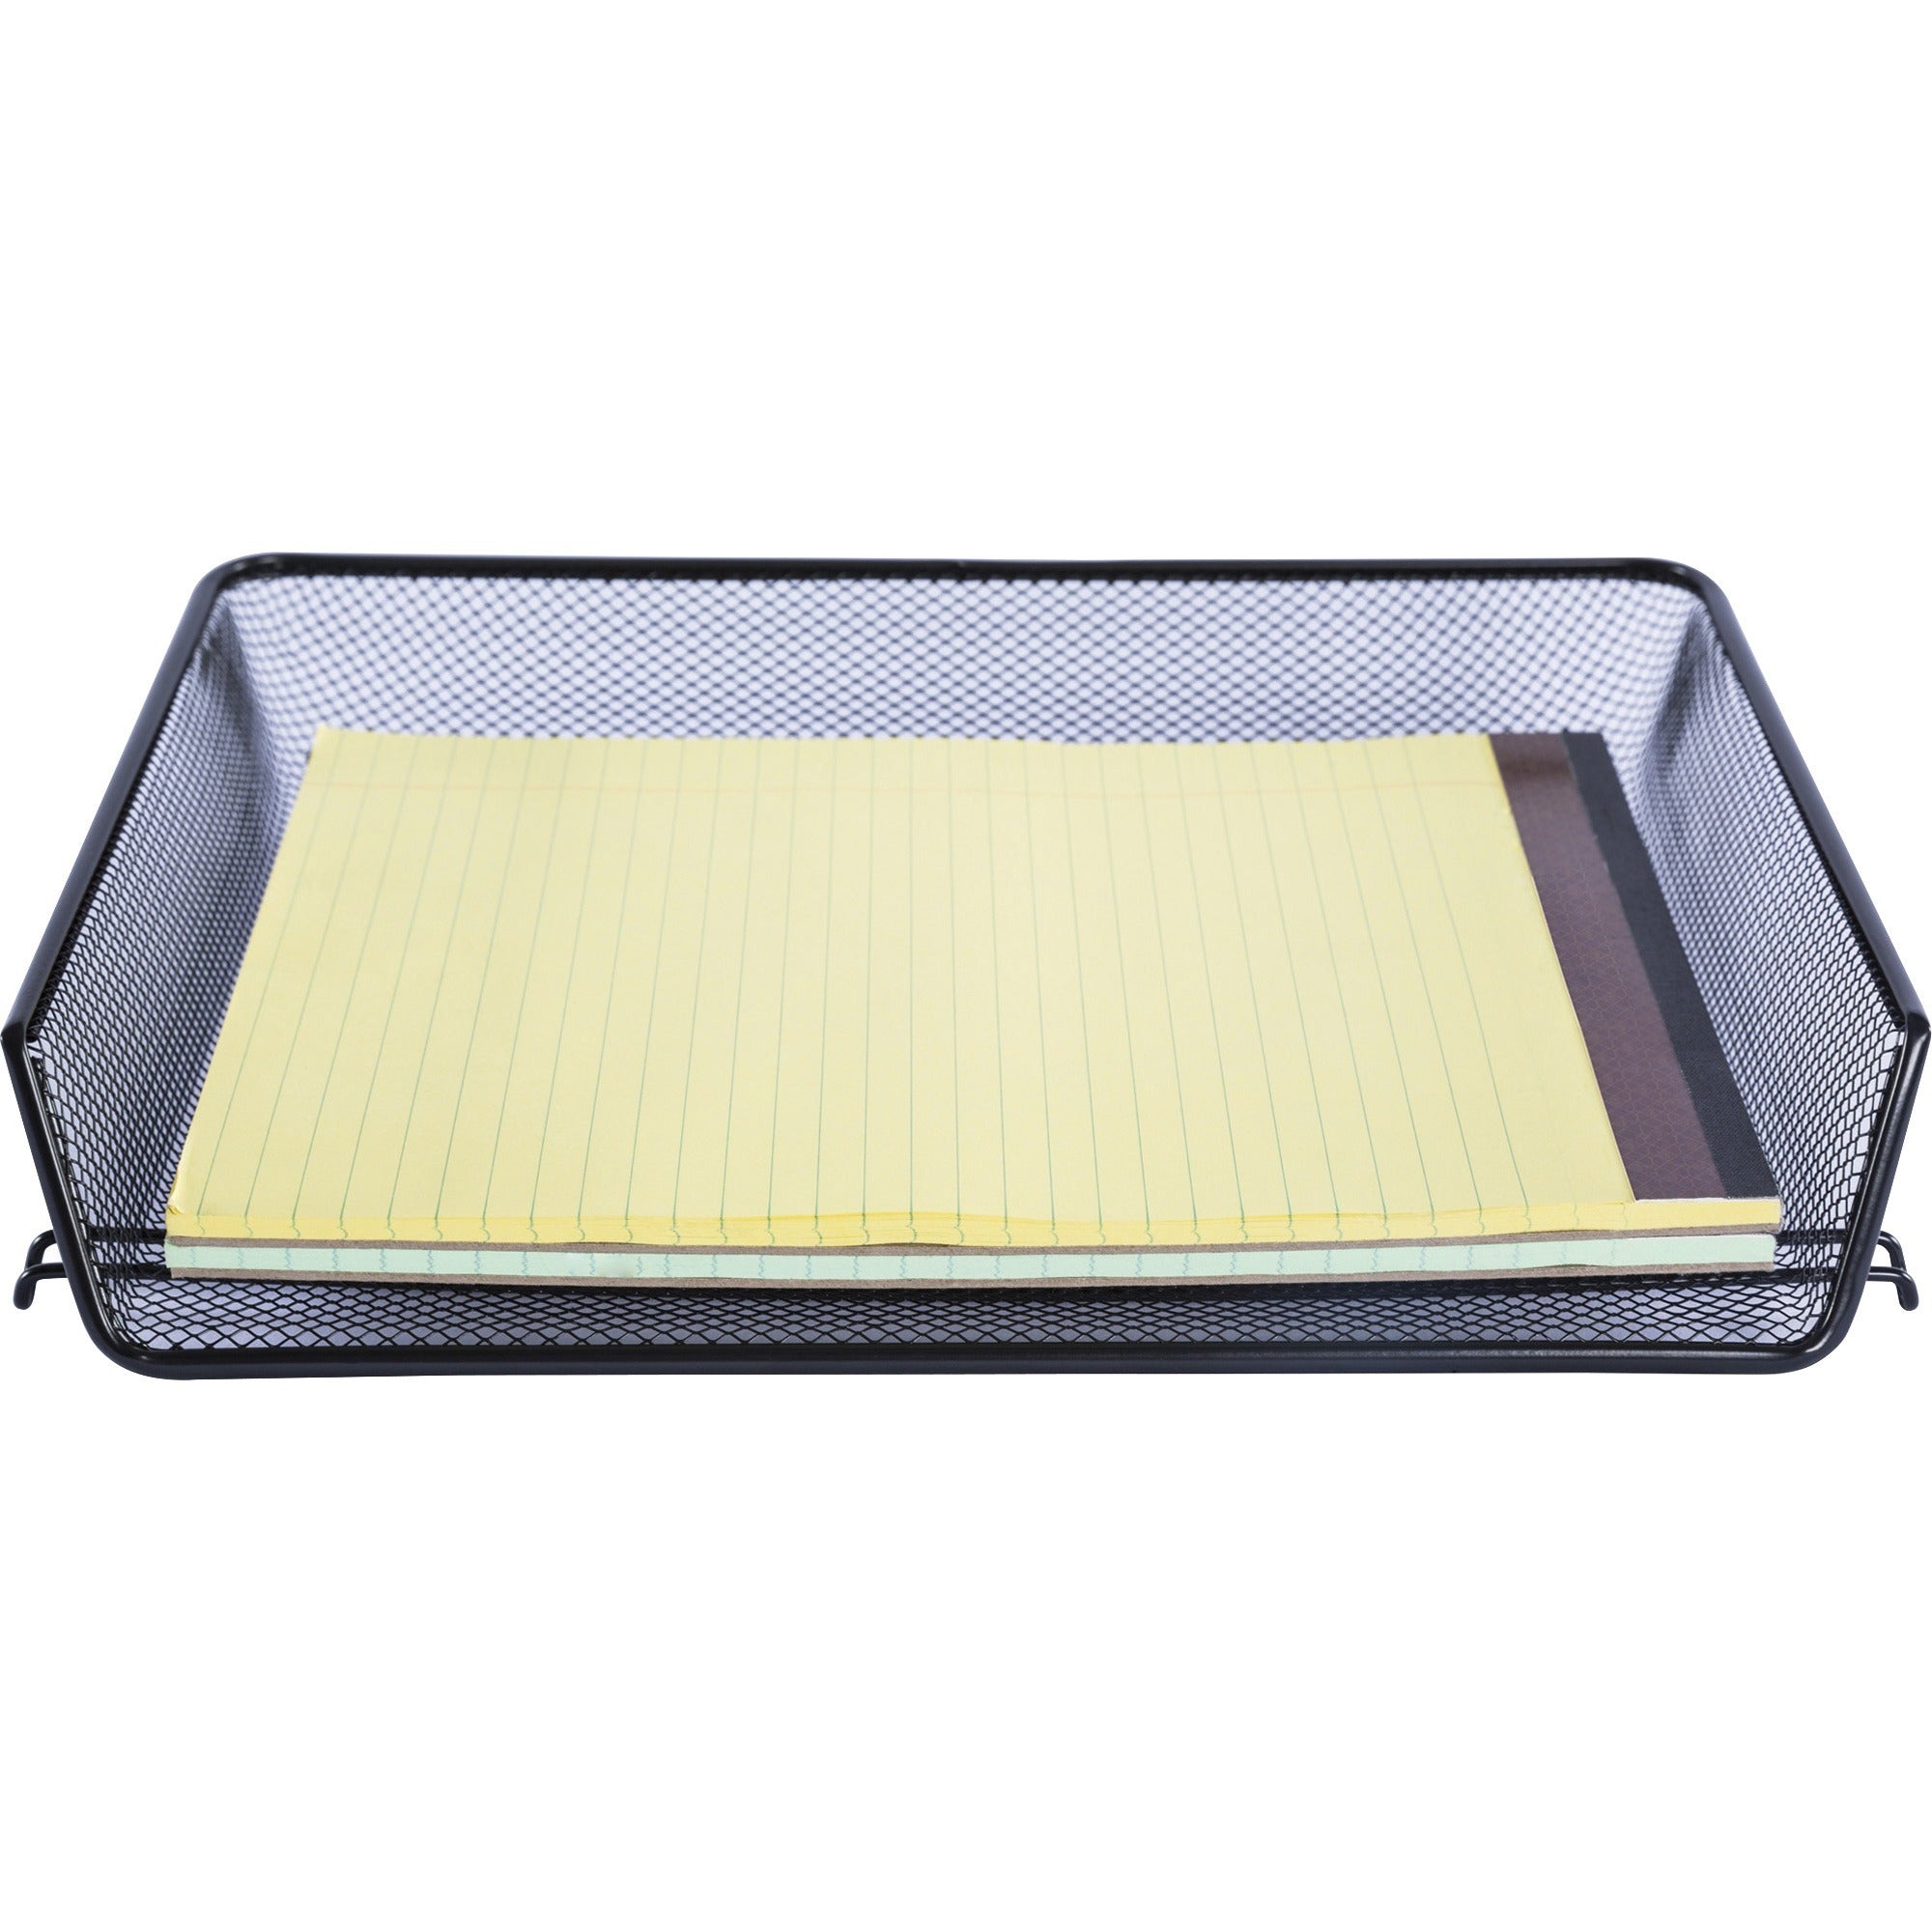 Lorell Side-loading Mesh Document Tray - 3" Height x 14.3" Width x 10.8" Depth - Stackable - Powder Coated - Black - Steel - 1 / Set - 